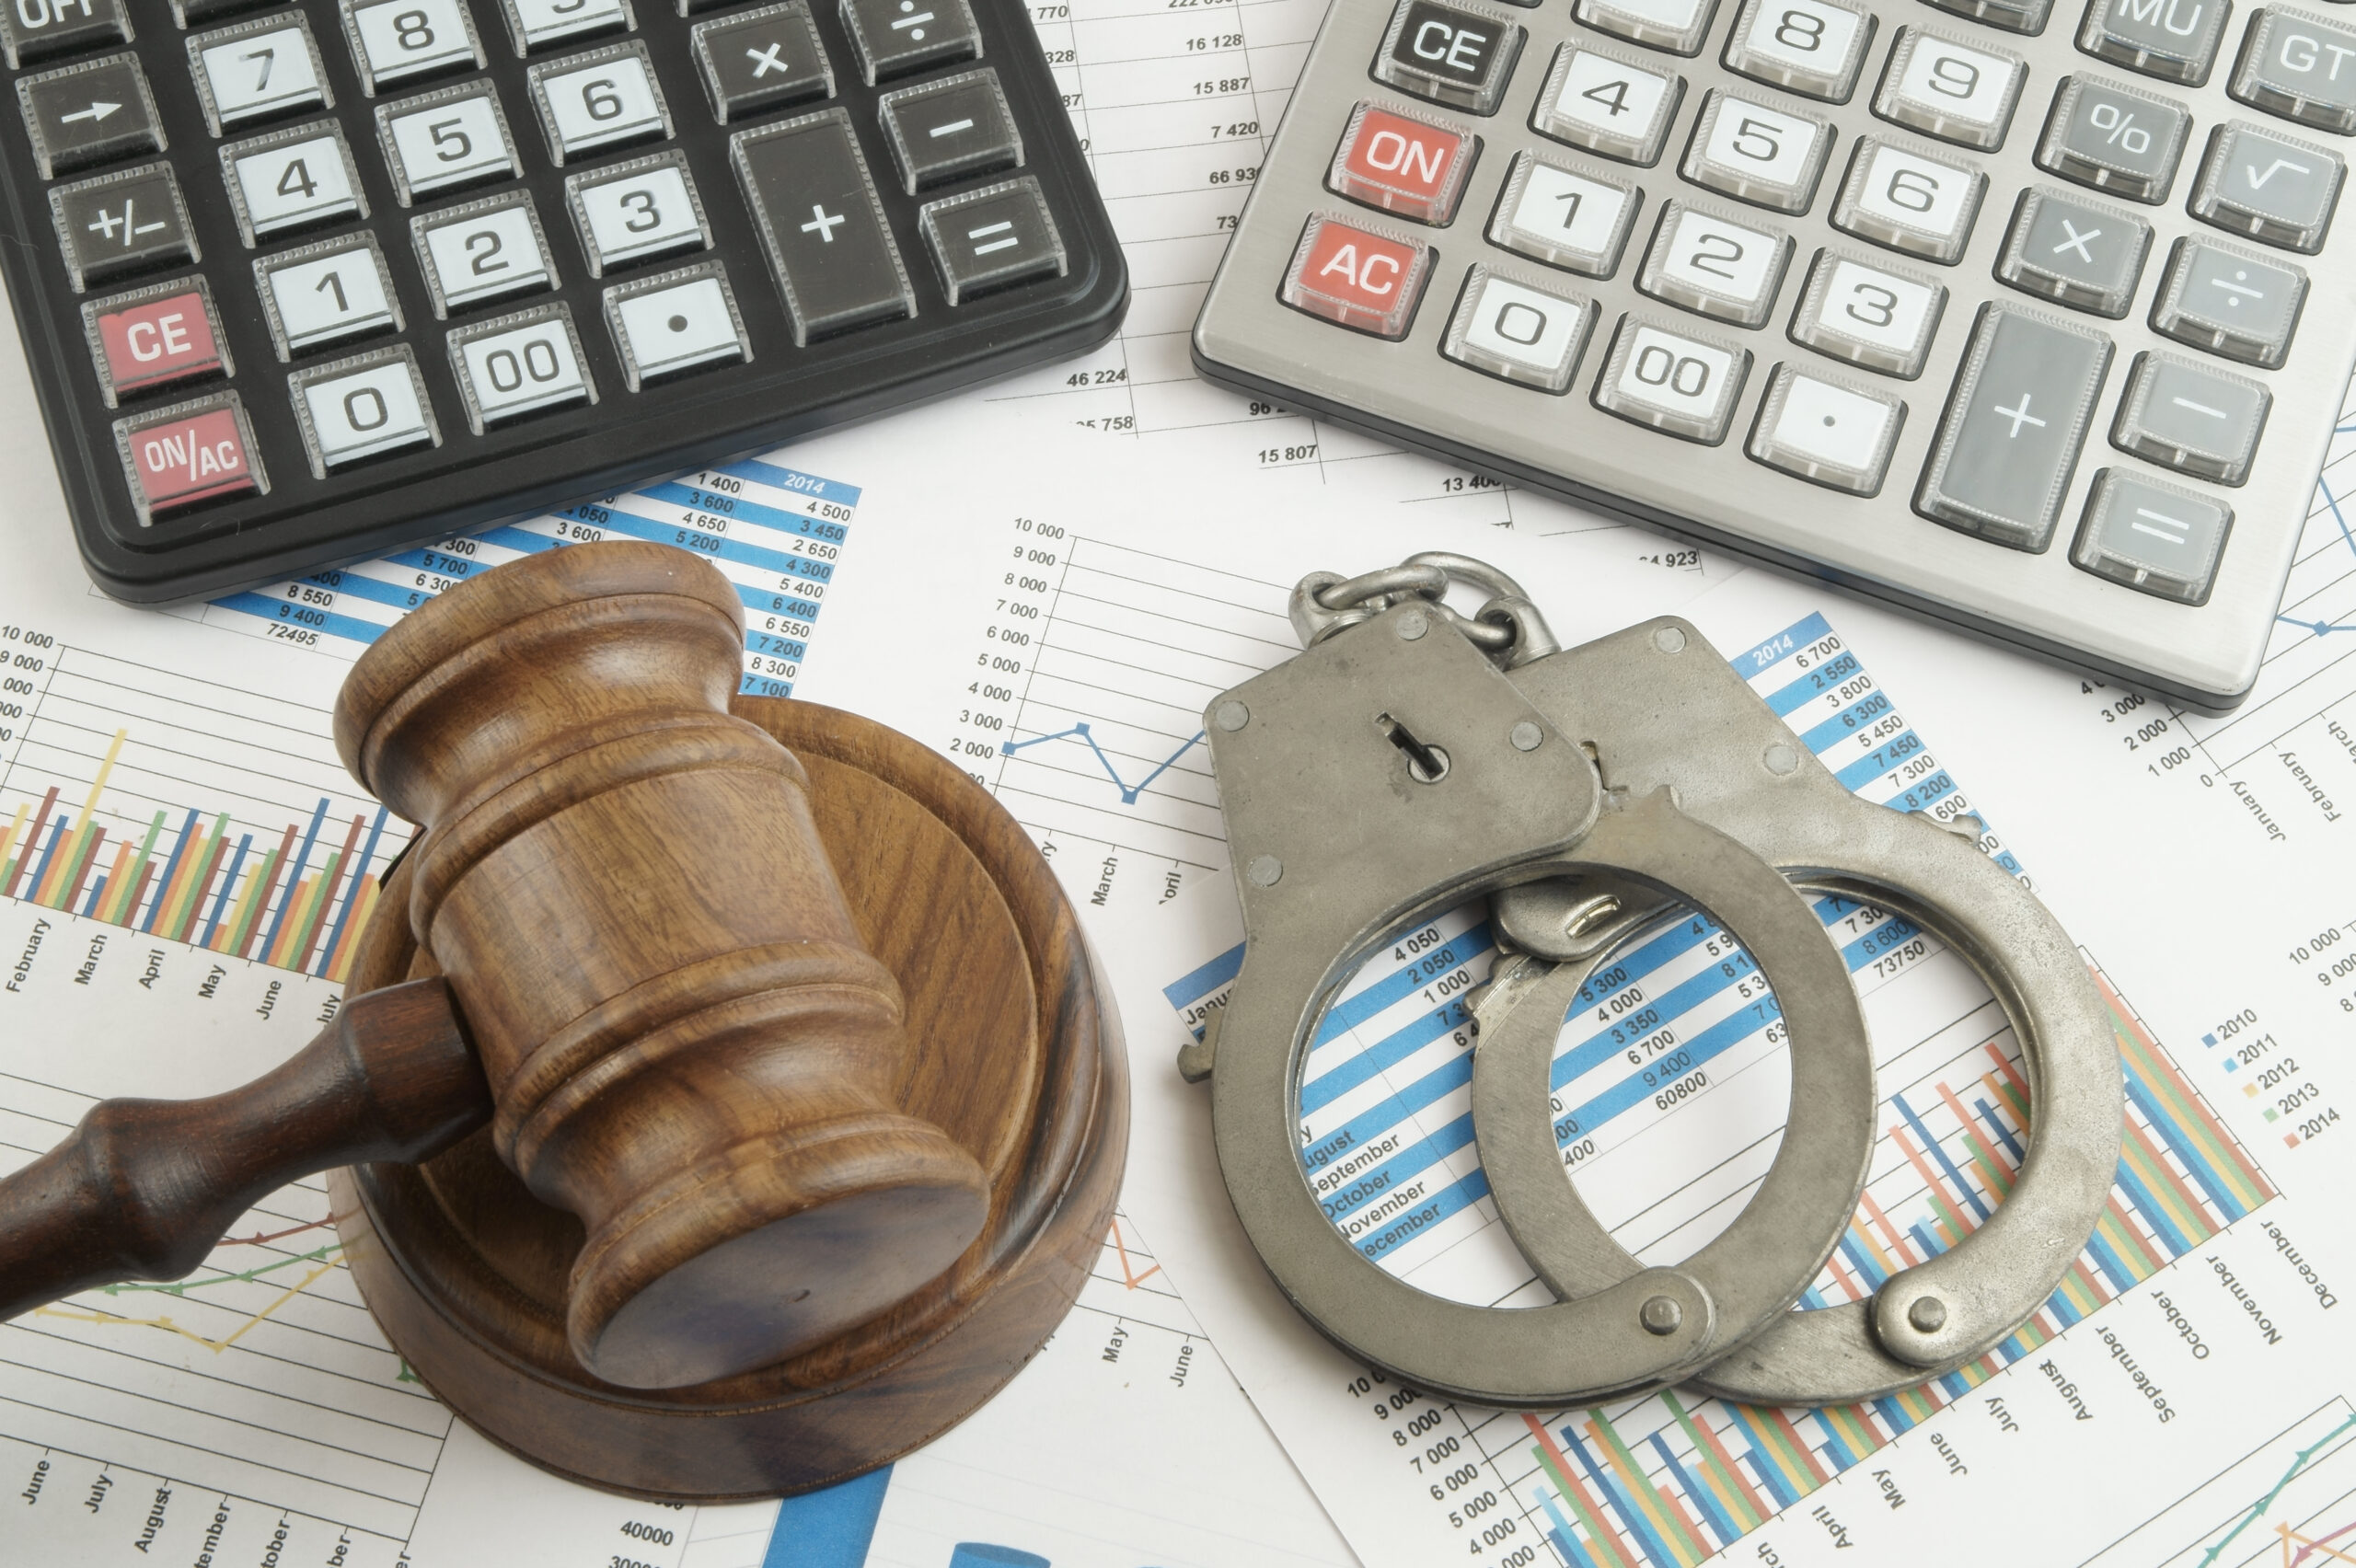 A wooden judge's gavel, metal handcuffs, calculators, and financial charts spread out on a surface, symbolizing the intersection of law, crime, and fraudulent credit finance.